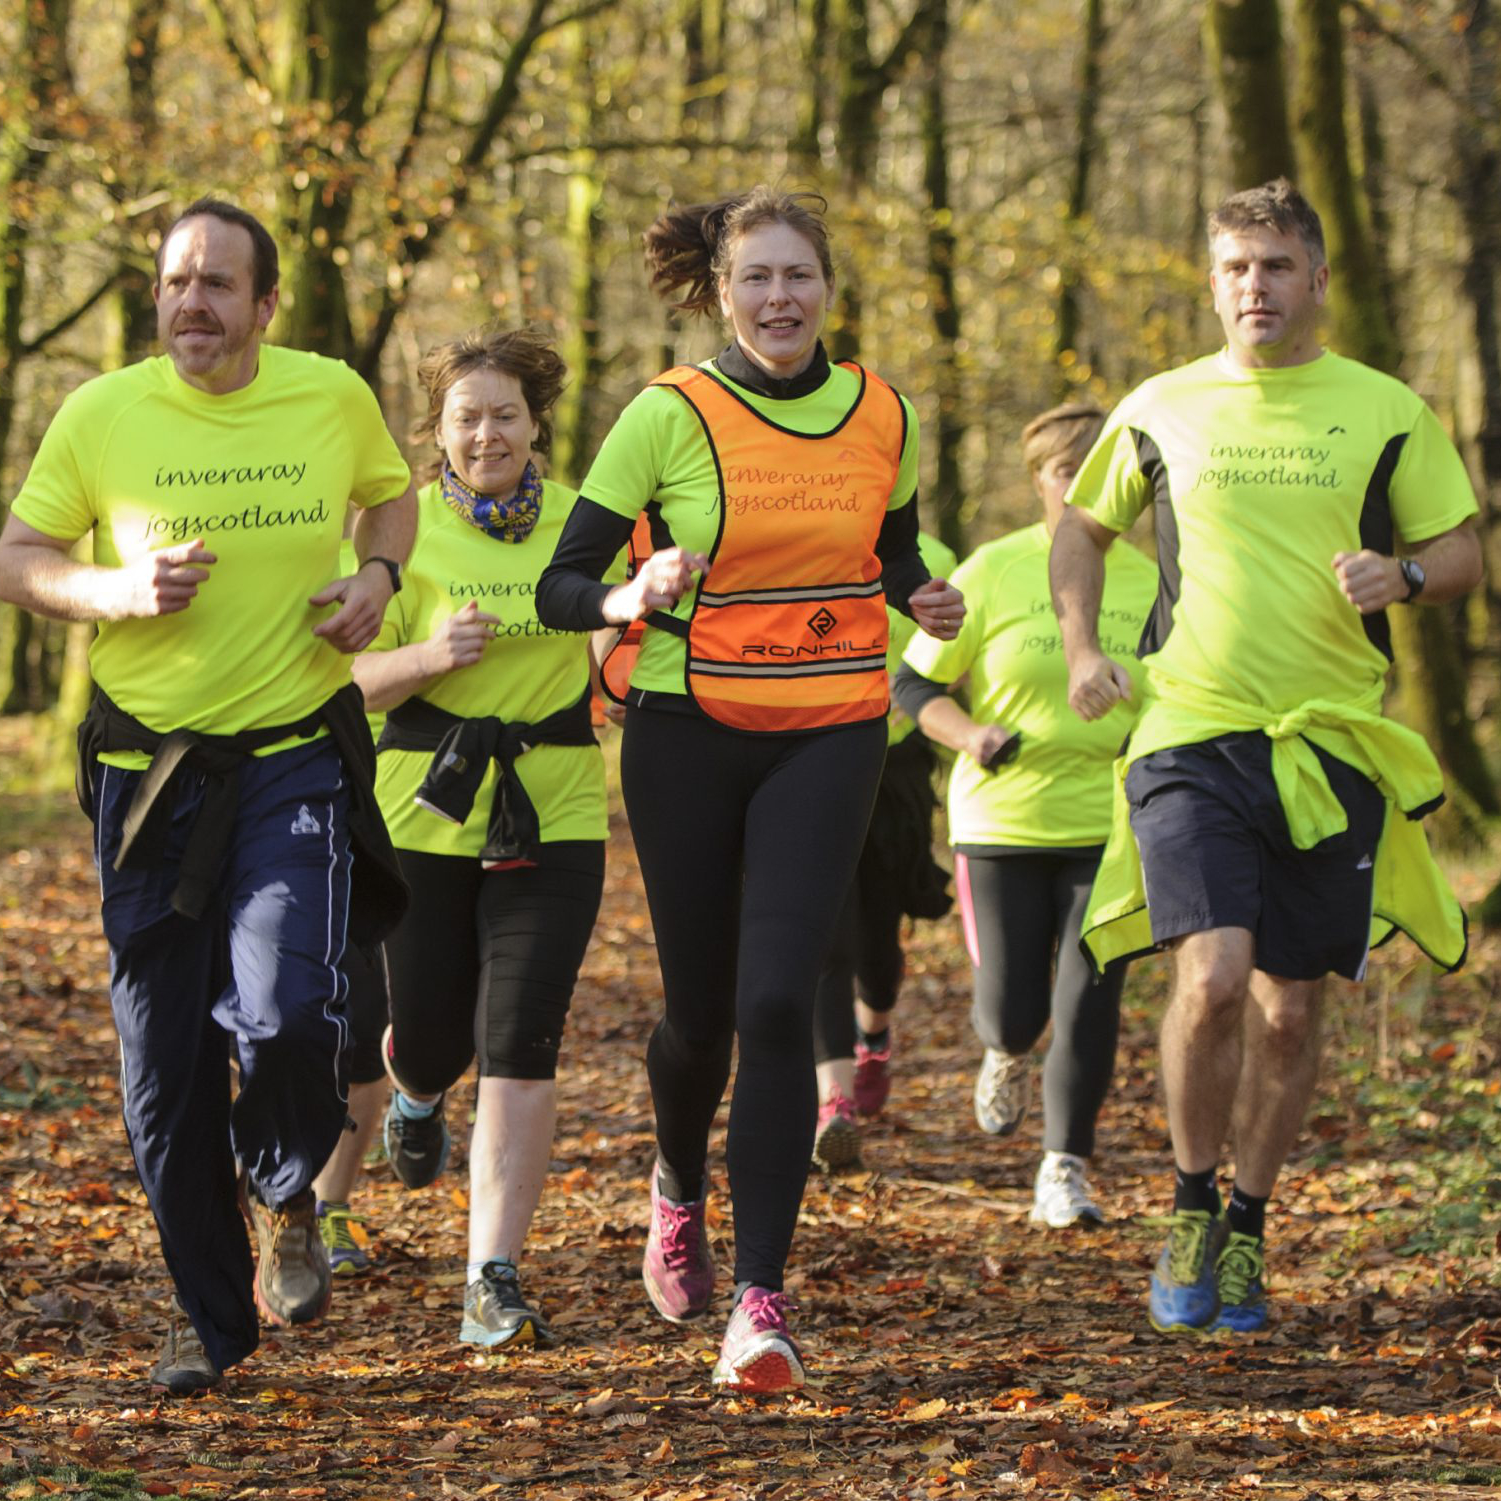 A group of people jogging on a woodland path